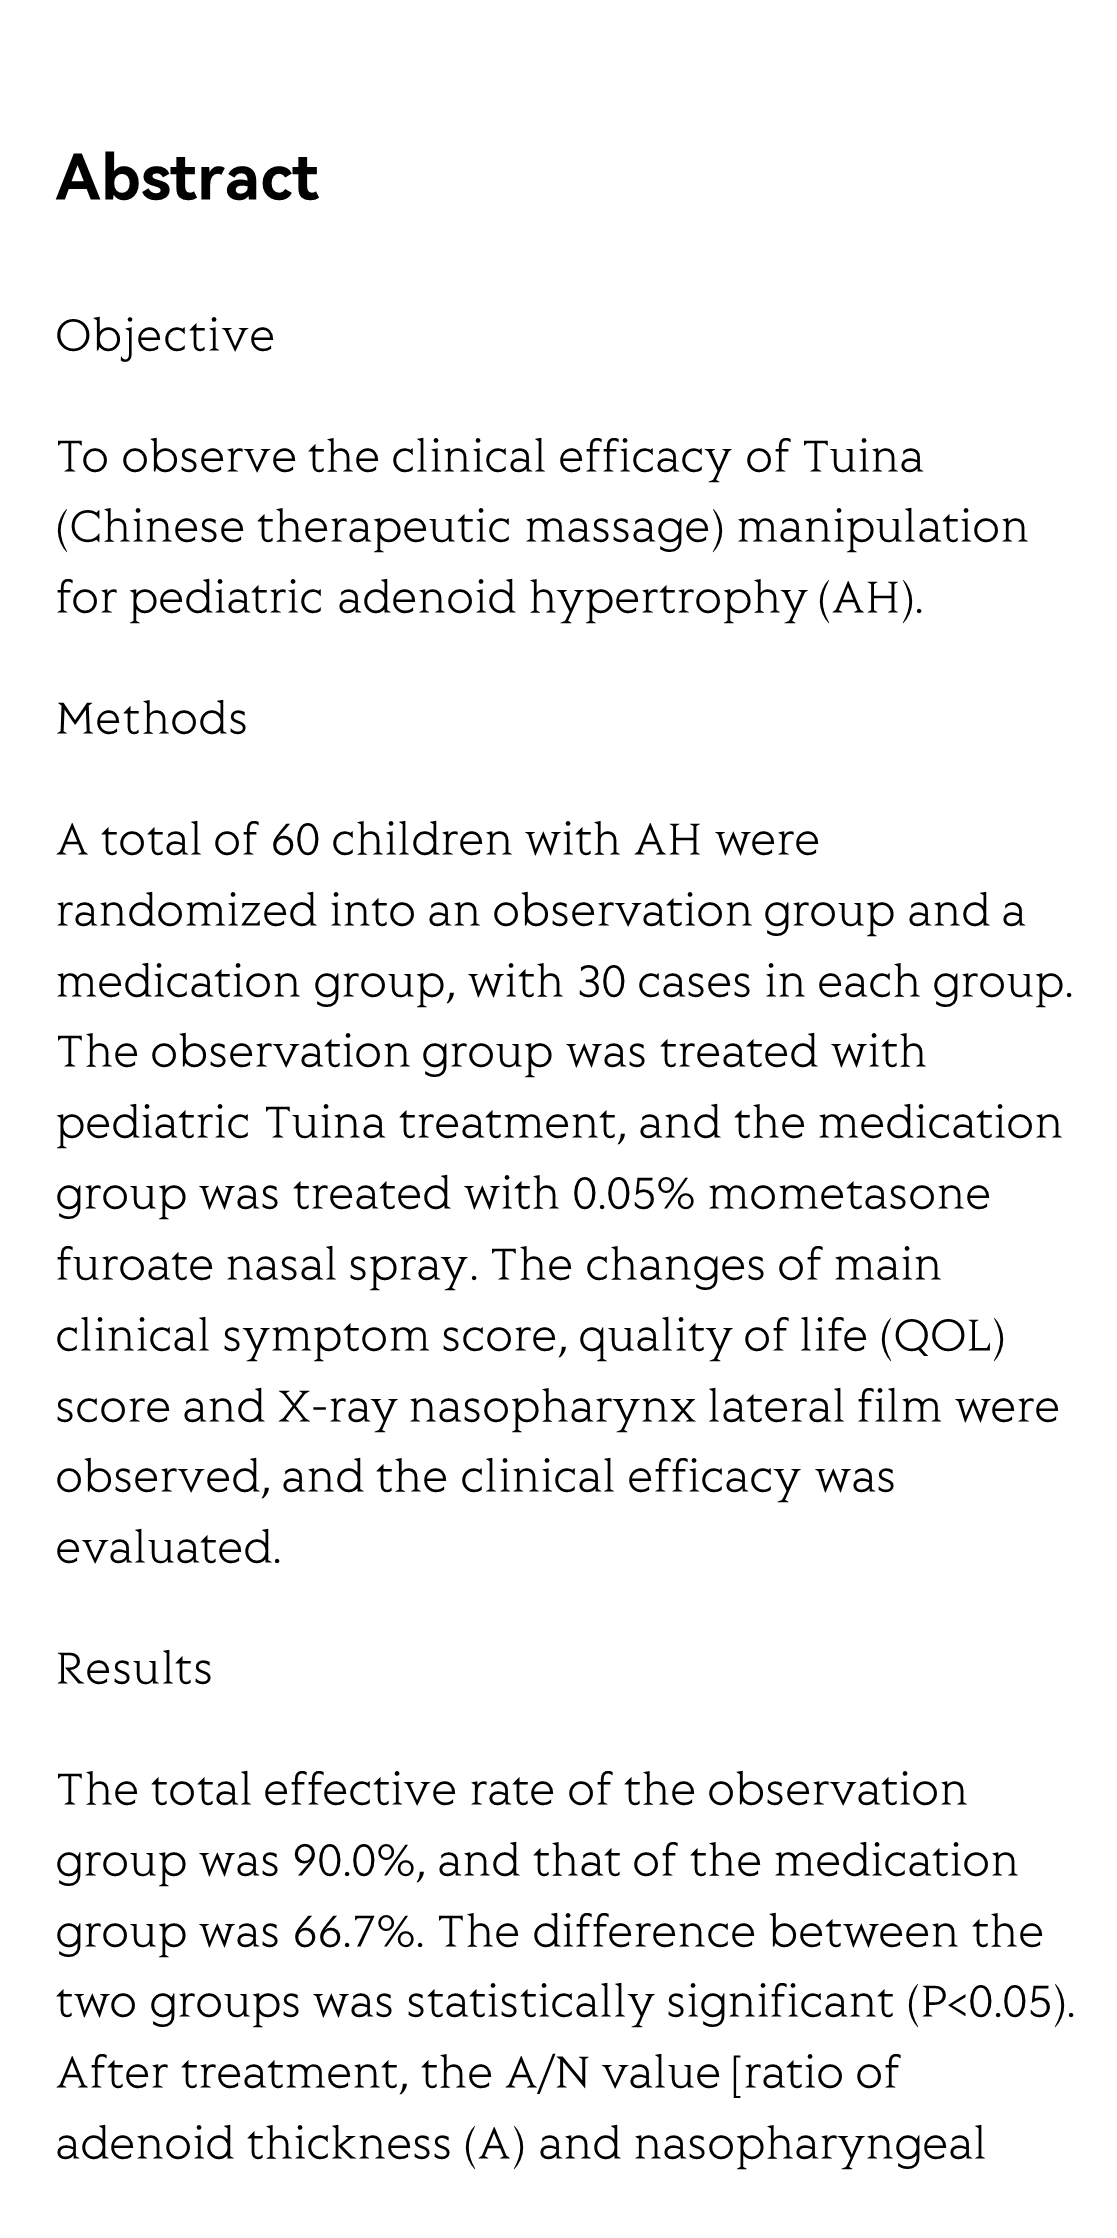 Therapeutic efficacy observation of Tuina manipulation for pediatric adenoid hypertrophy_2